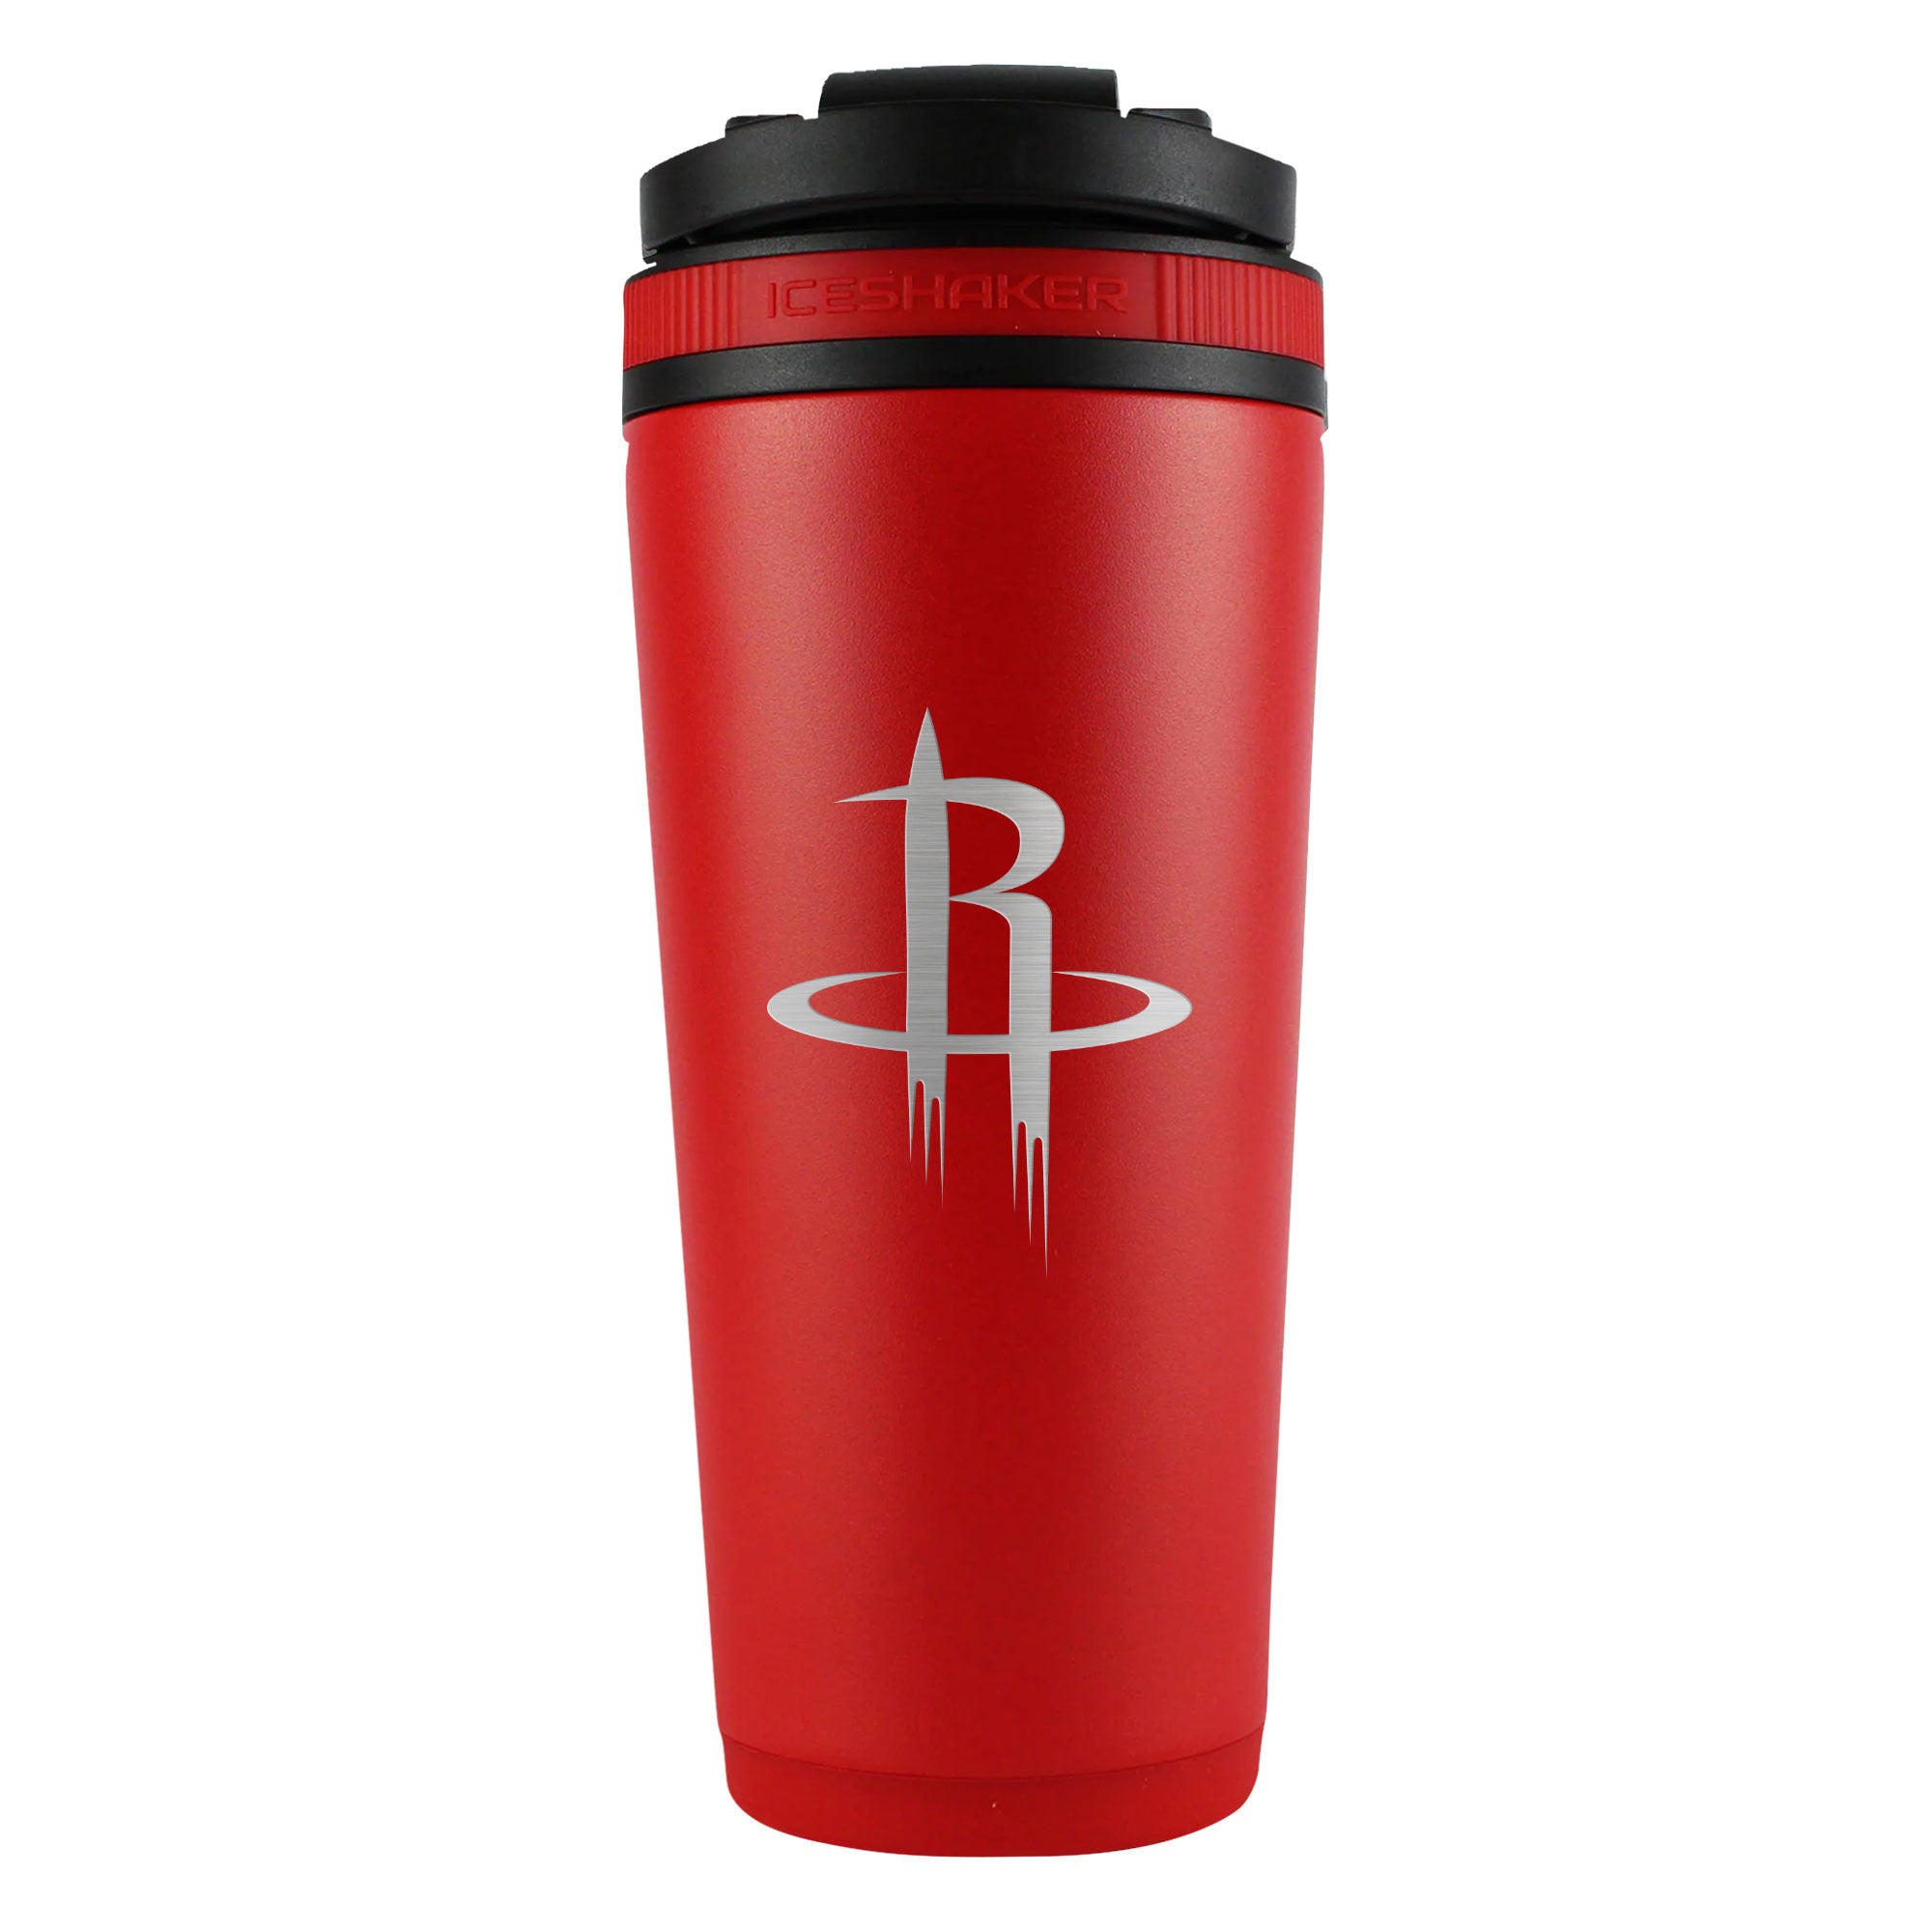 Officially Licensed Houston Rockets 26oz Ice Shaker - Red